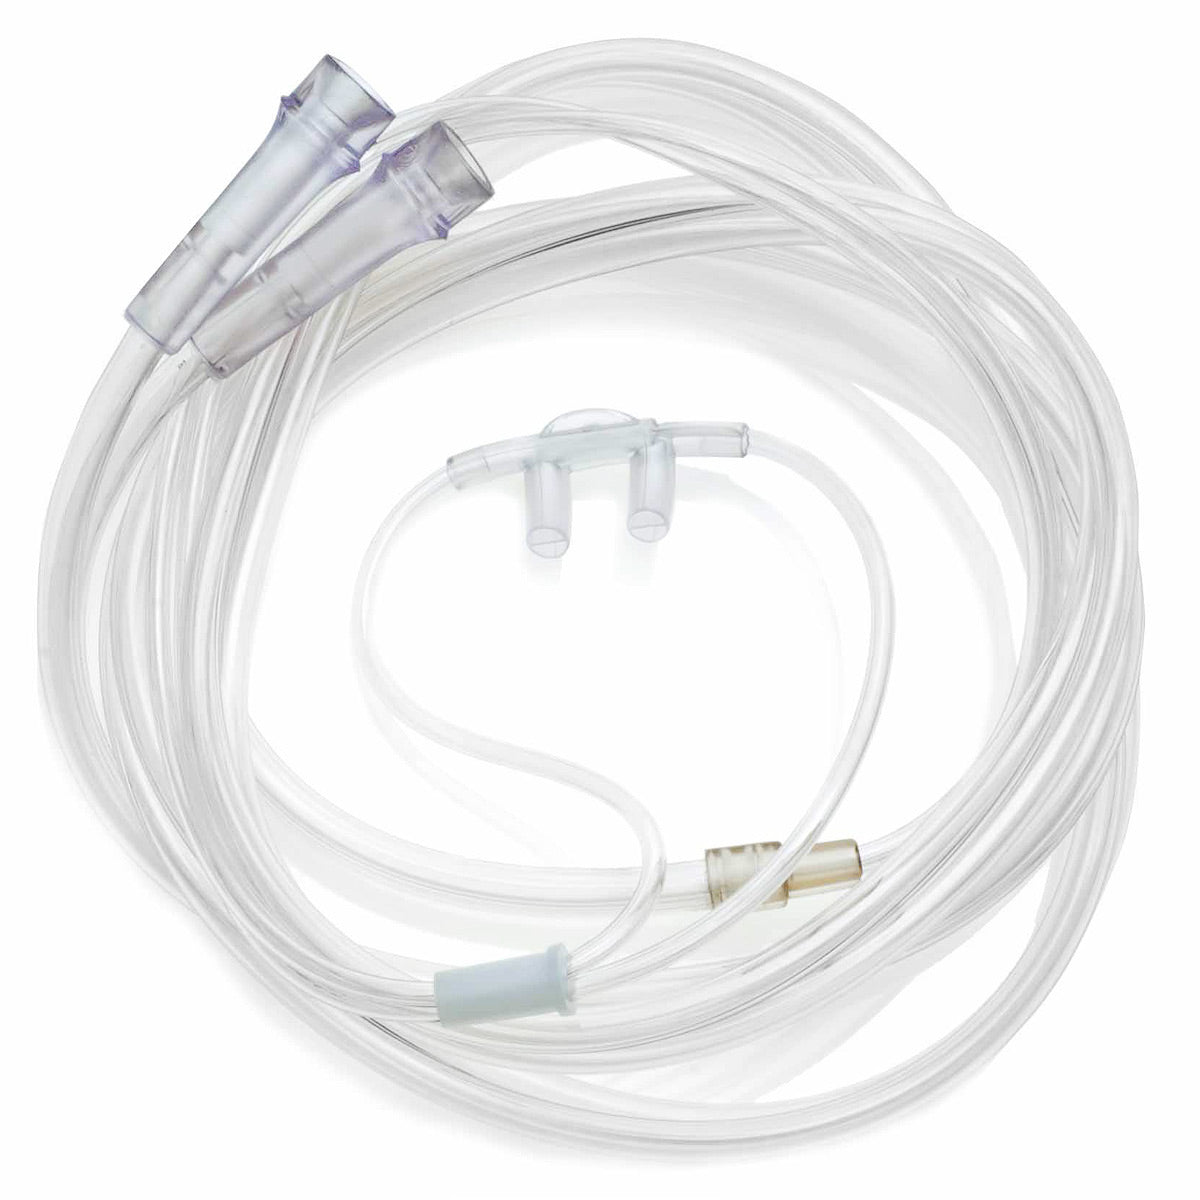 Oxygen Conserving Adult Nasal Cannula with 5 Foot Dual Lumen Supply Tubes